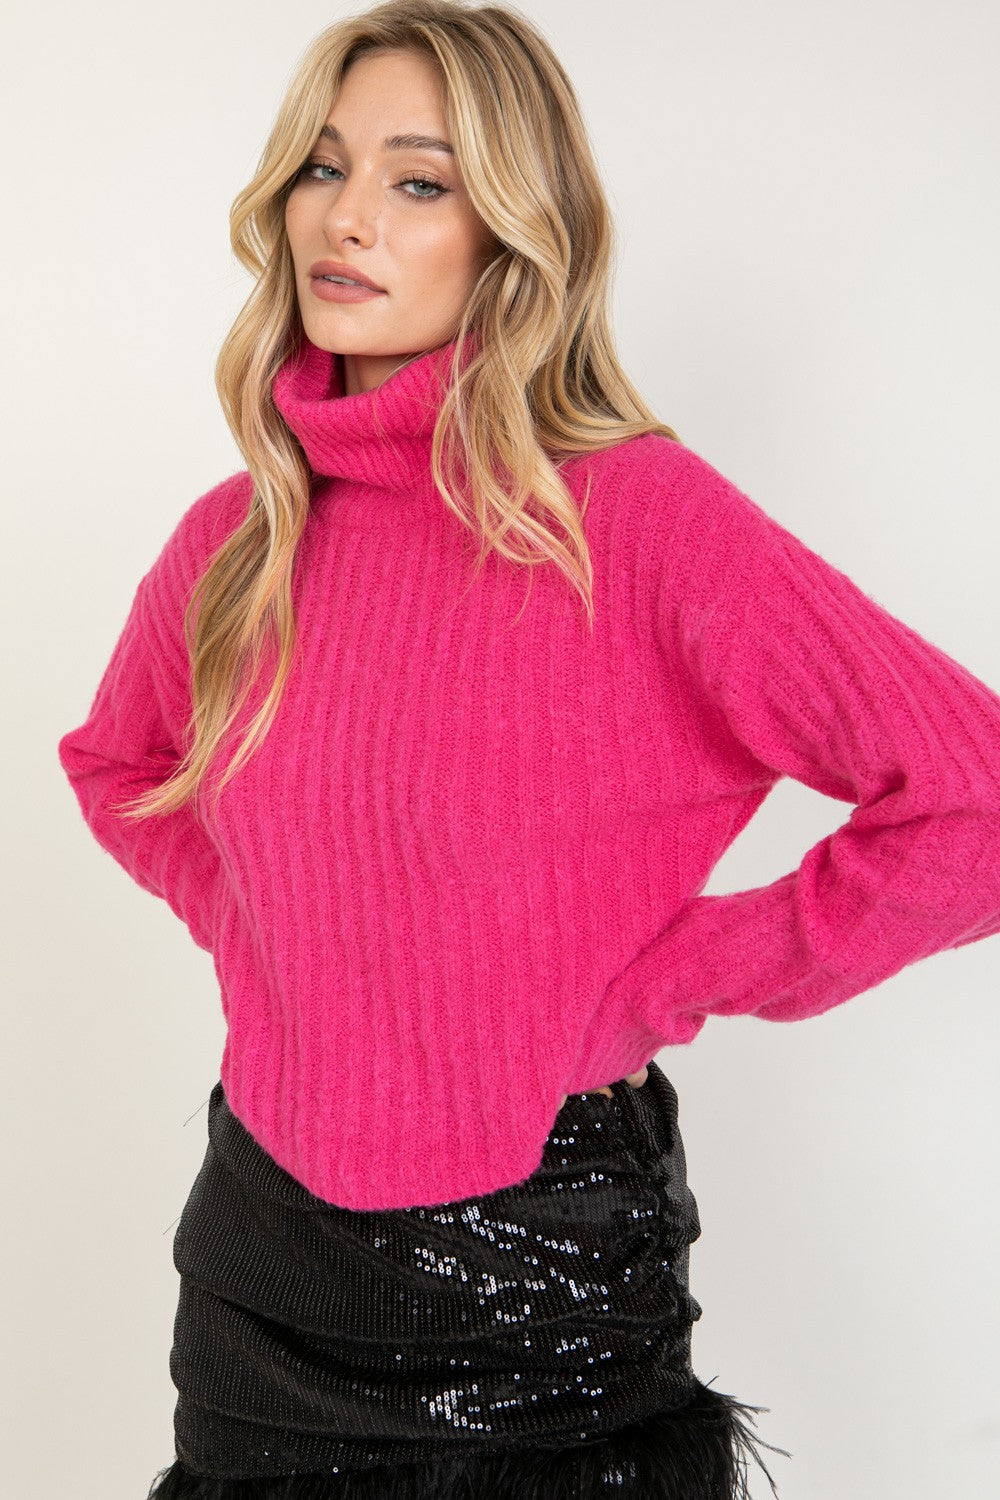 Hot Pink Cropped Turtle Neck Ribbed Sweater